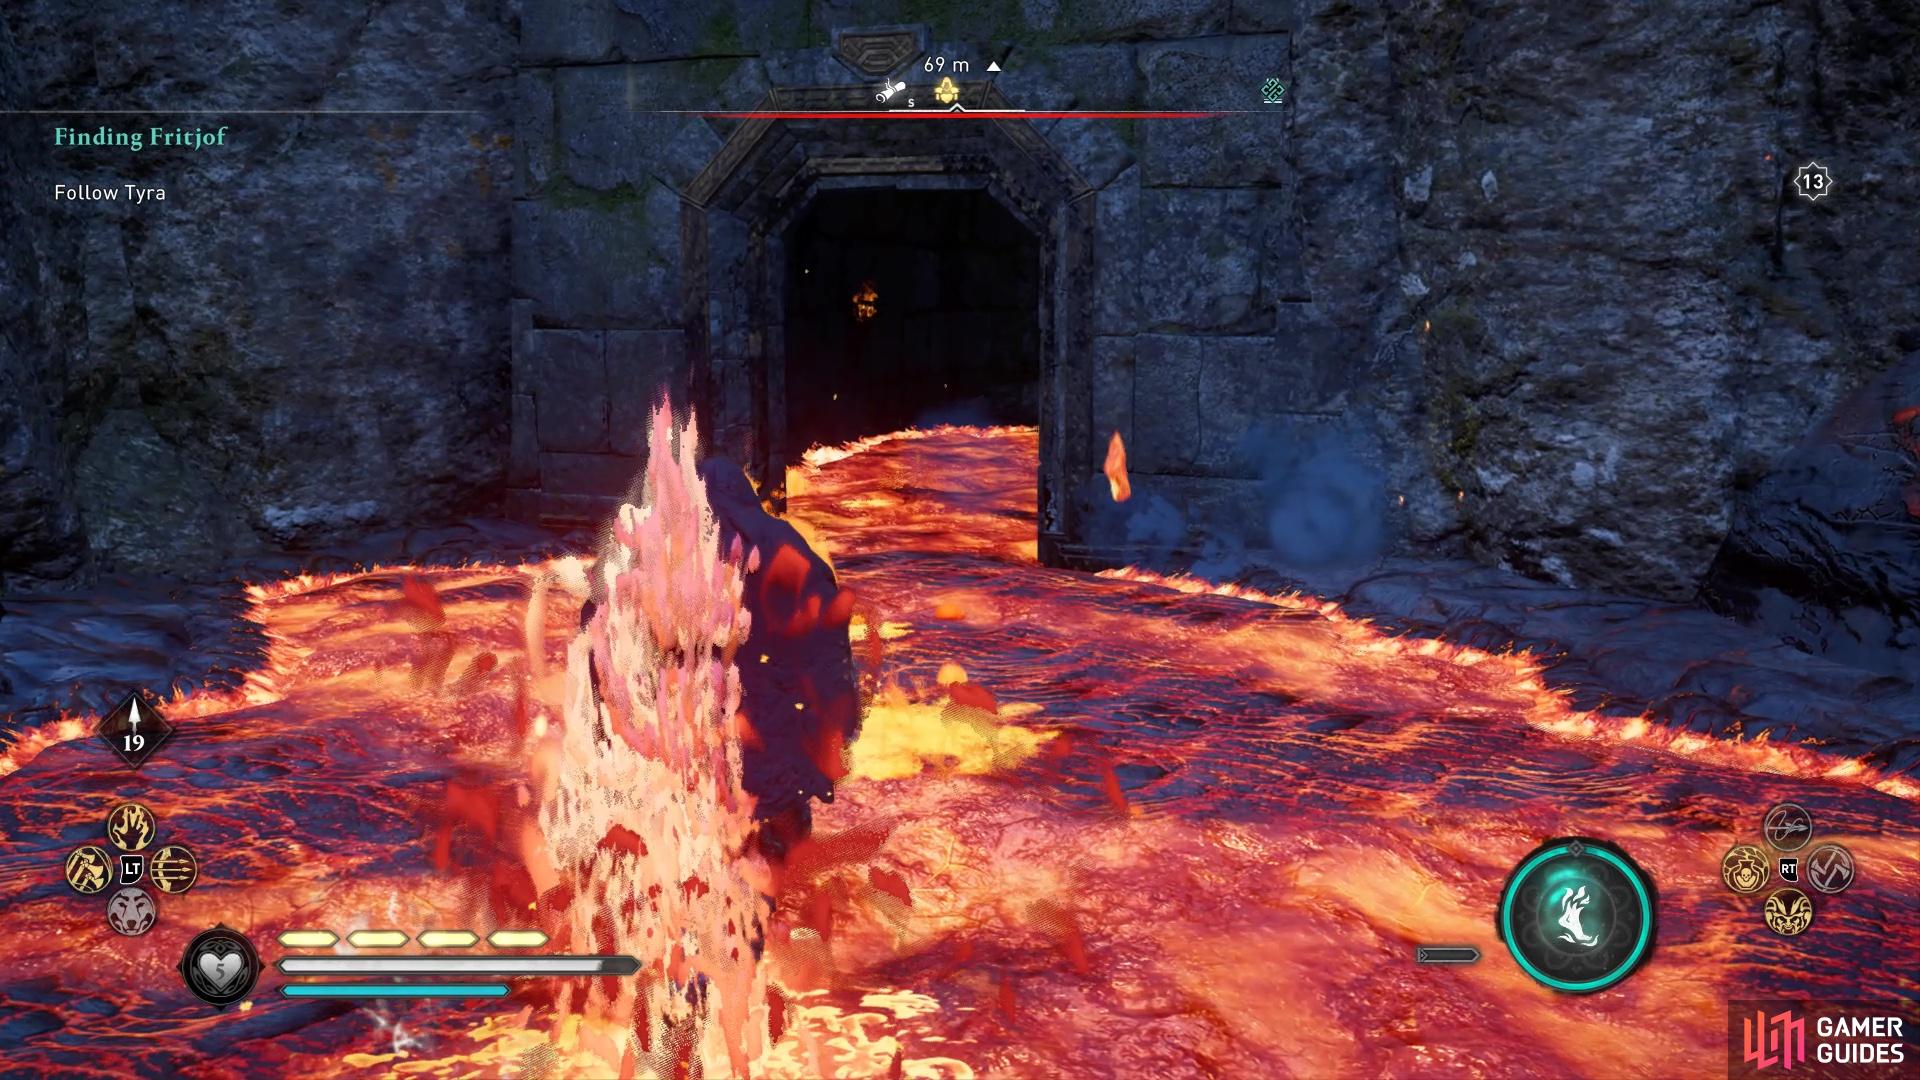 To unlock the chest, you'll need to find the key inside this cave (you need the Power of Muspelheim).